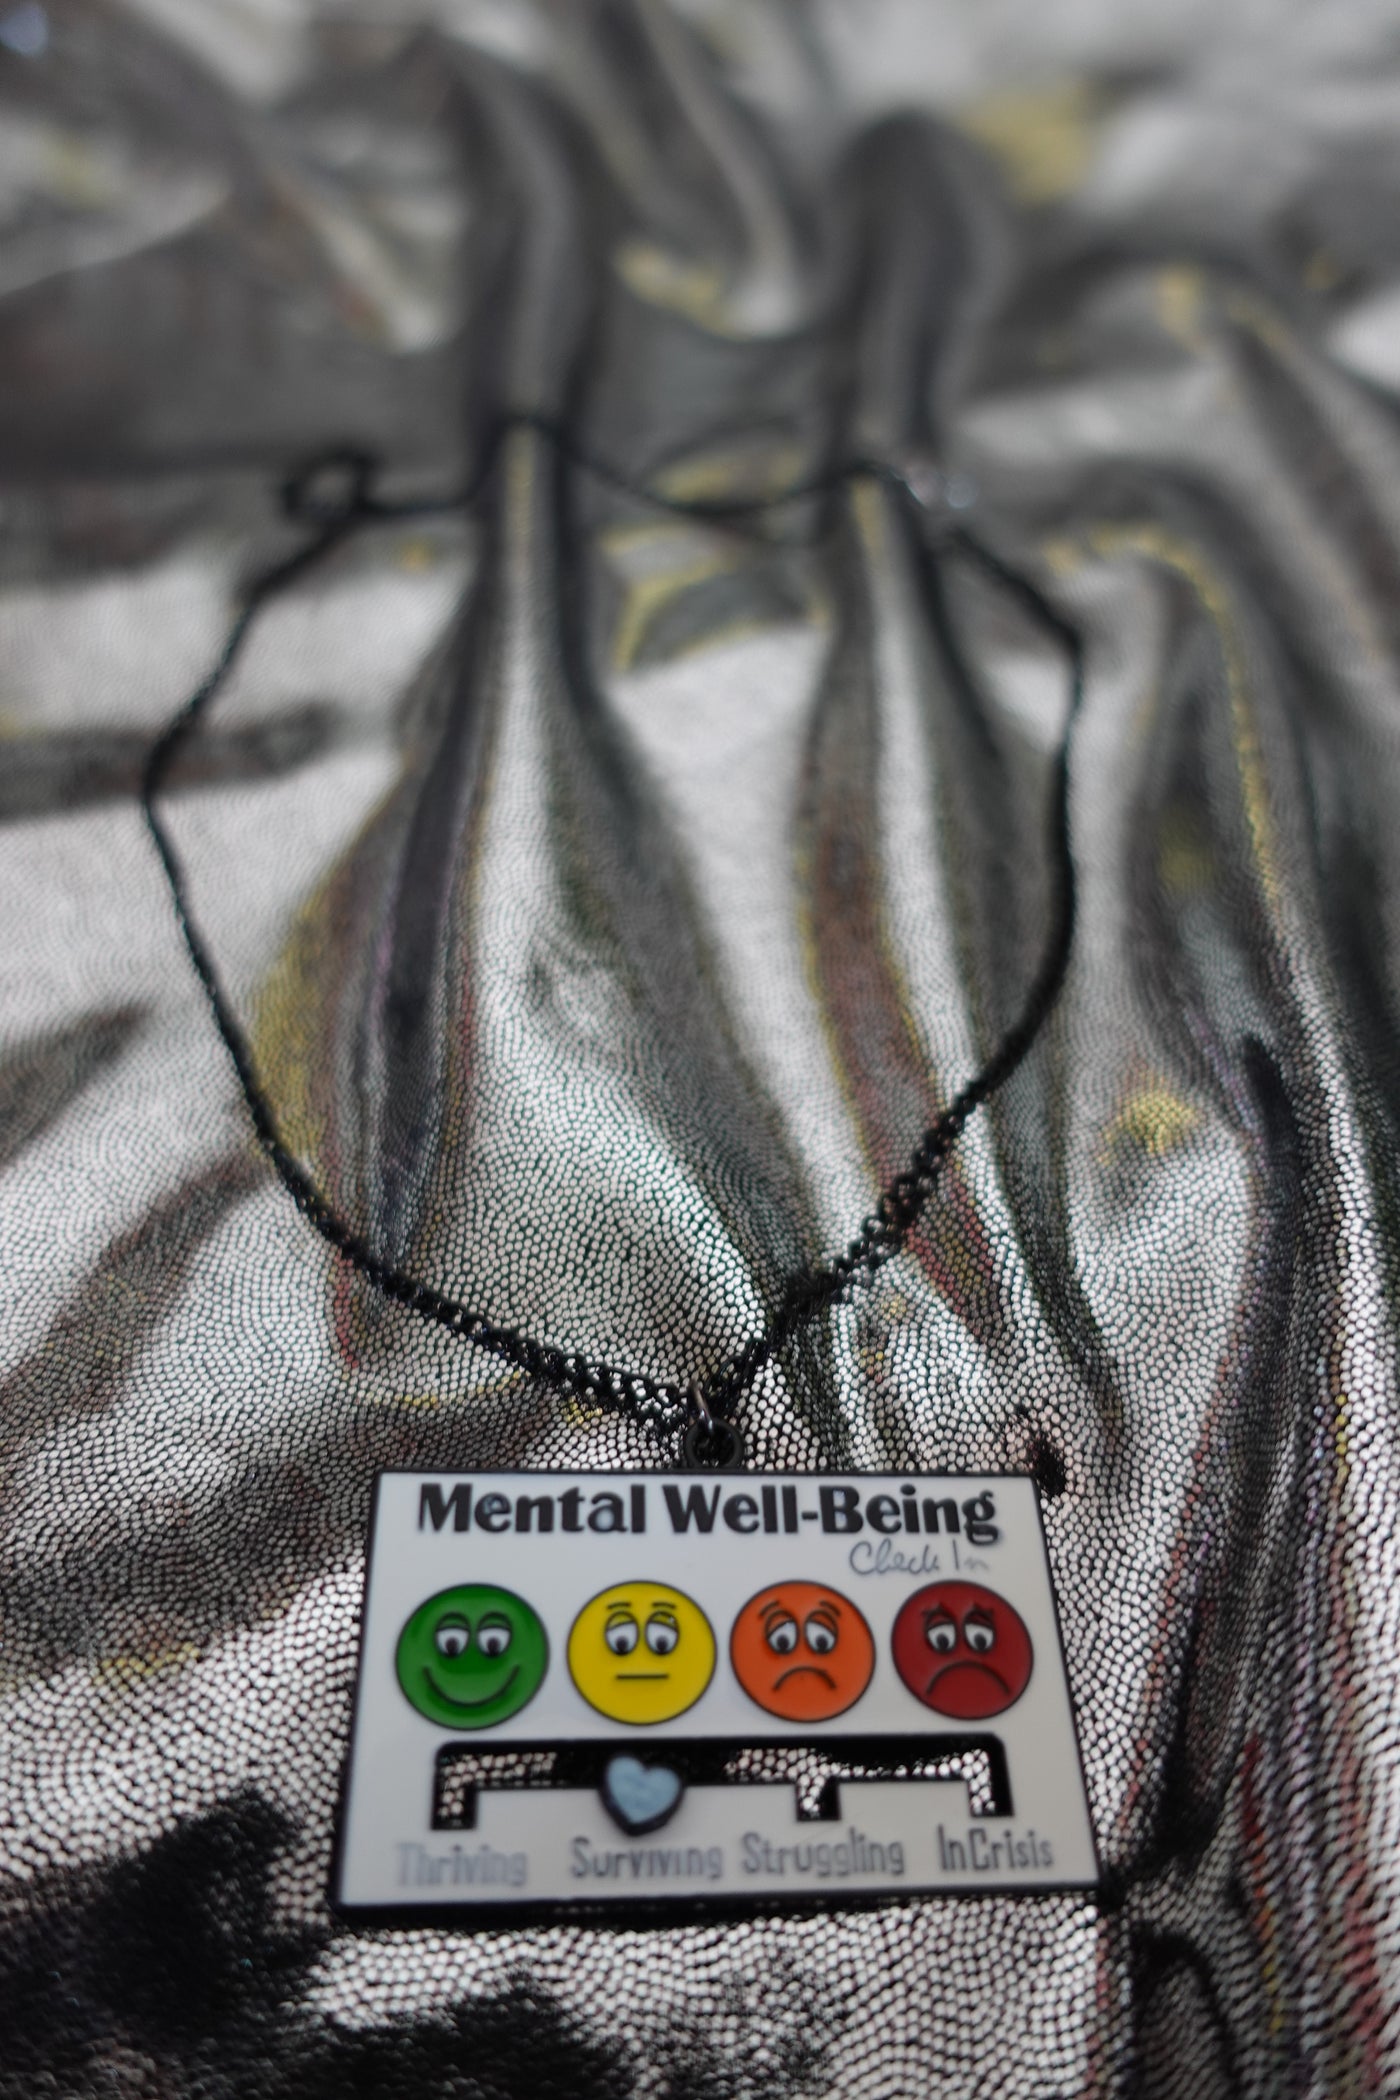 Mental Well Being Check In Necklace